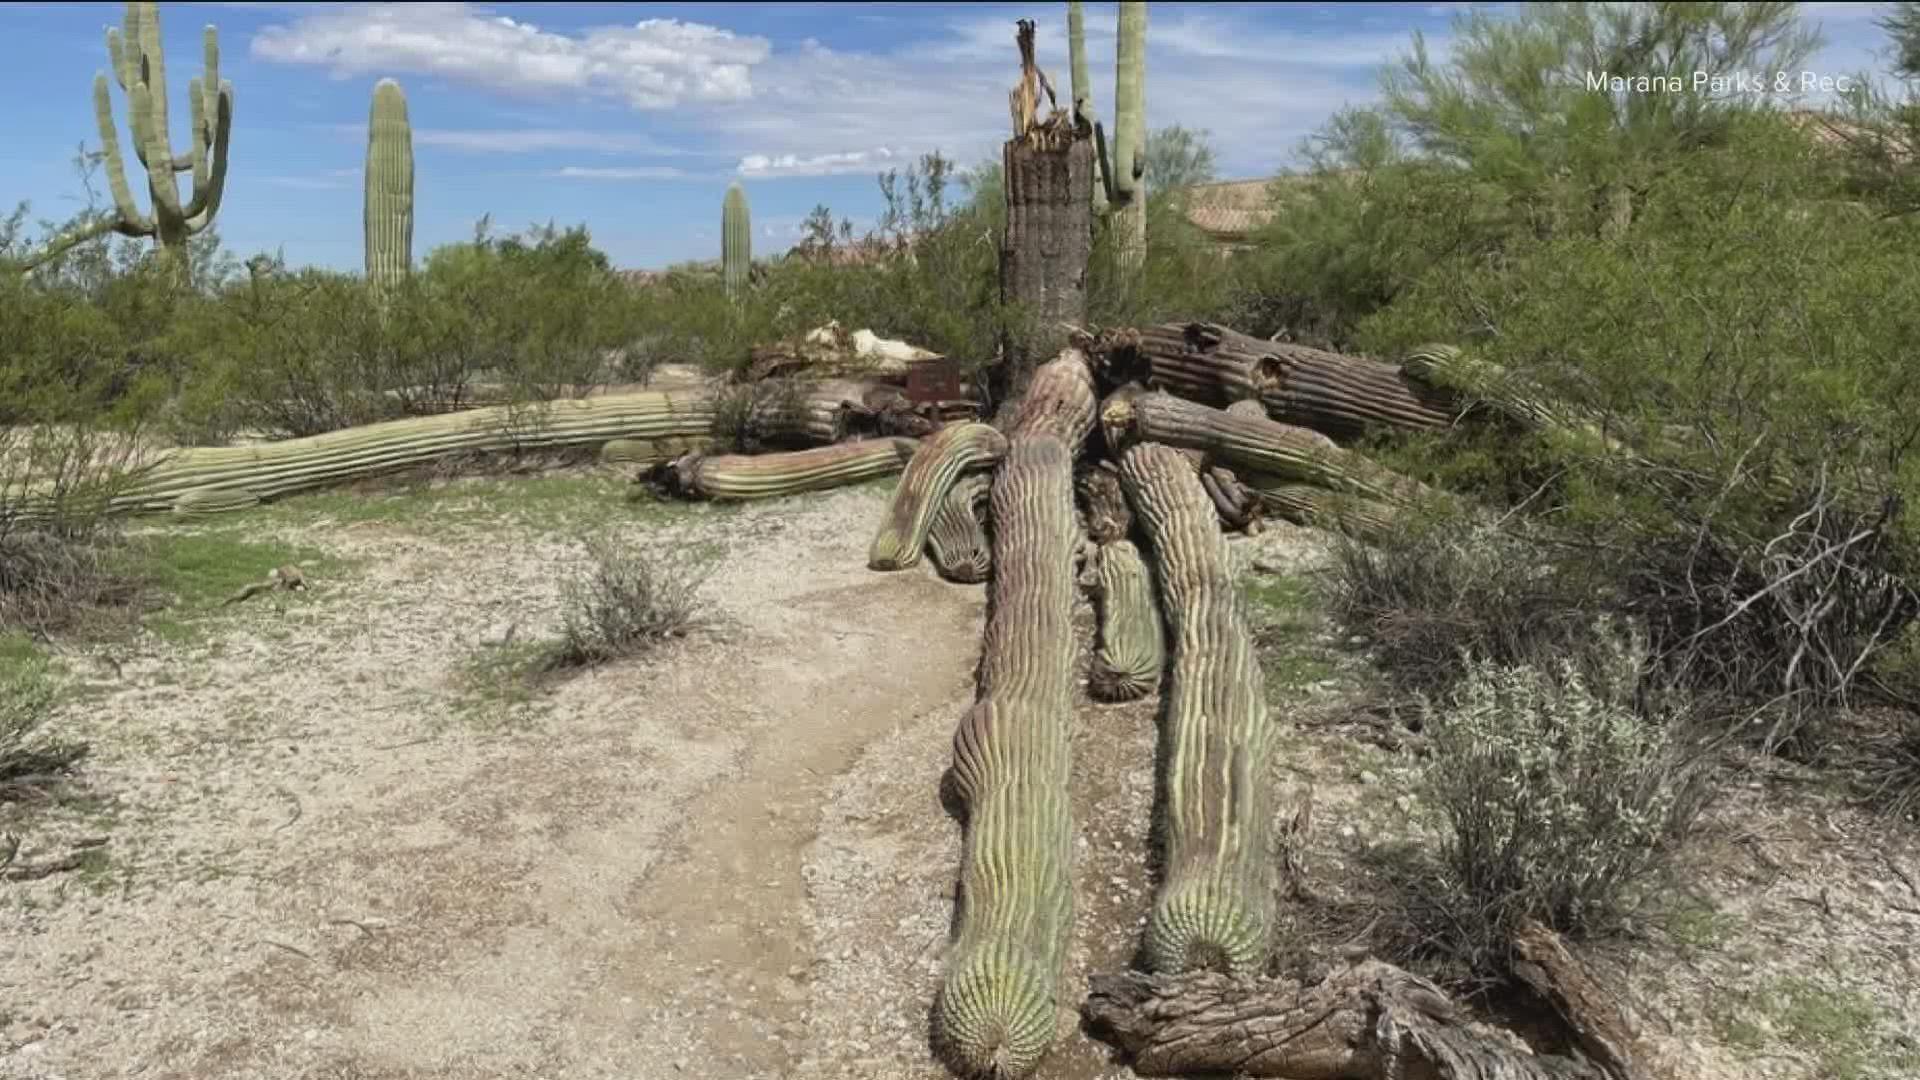 Town officials said age and bacteria contributed to the saguaro’s death.